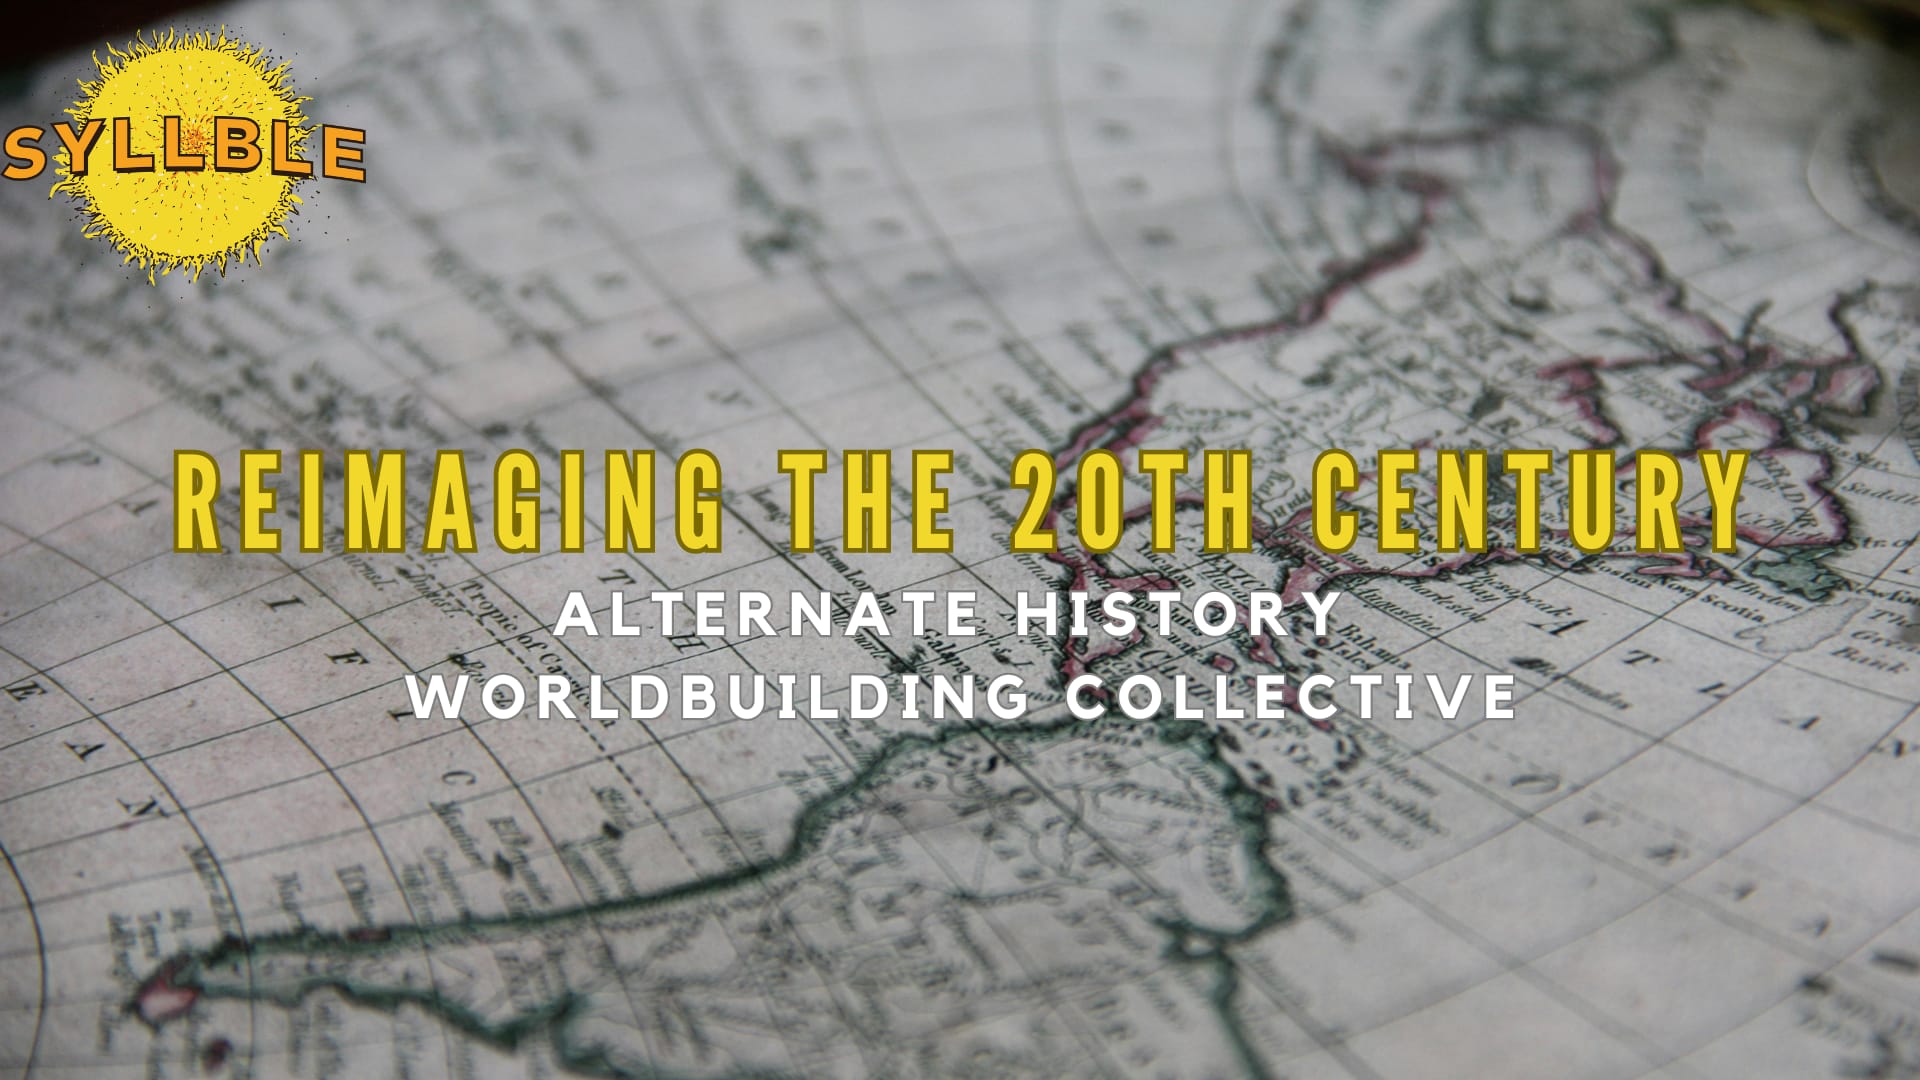 Syllble To Launch New Collaborative Worldbuilding Project on The Alternate History Genre 